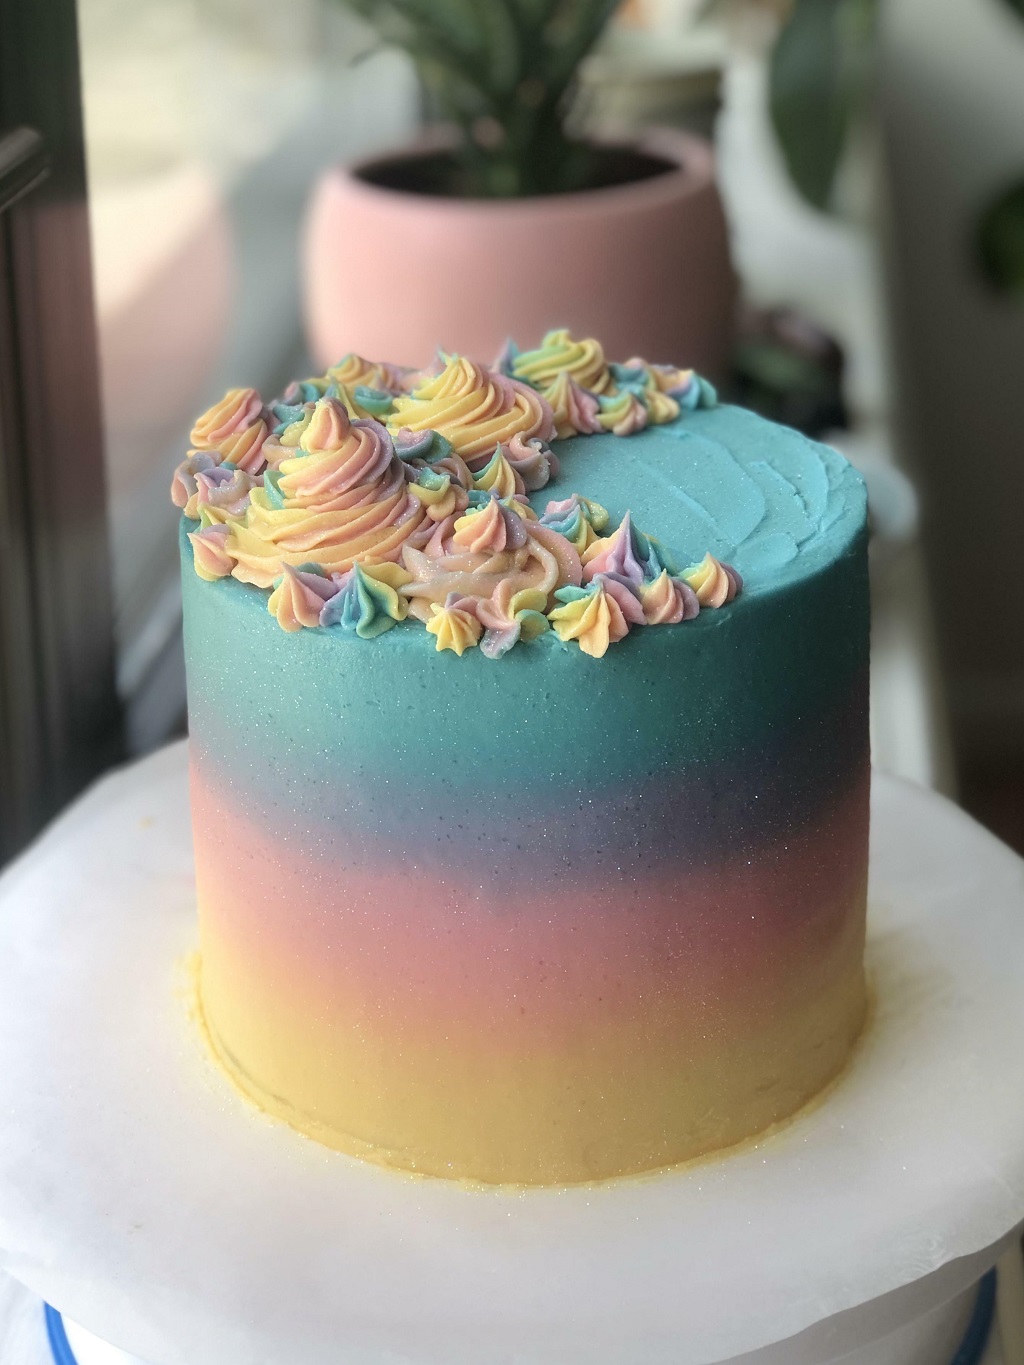 Still Excited About How Smooth My Last Cake Turned Out